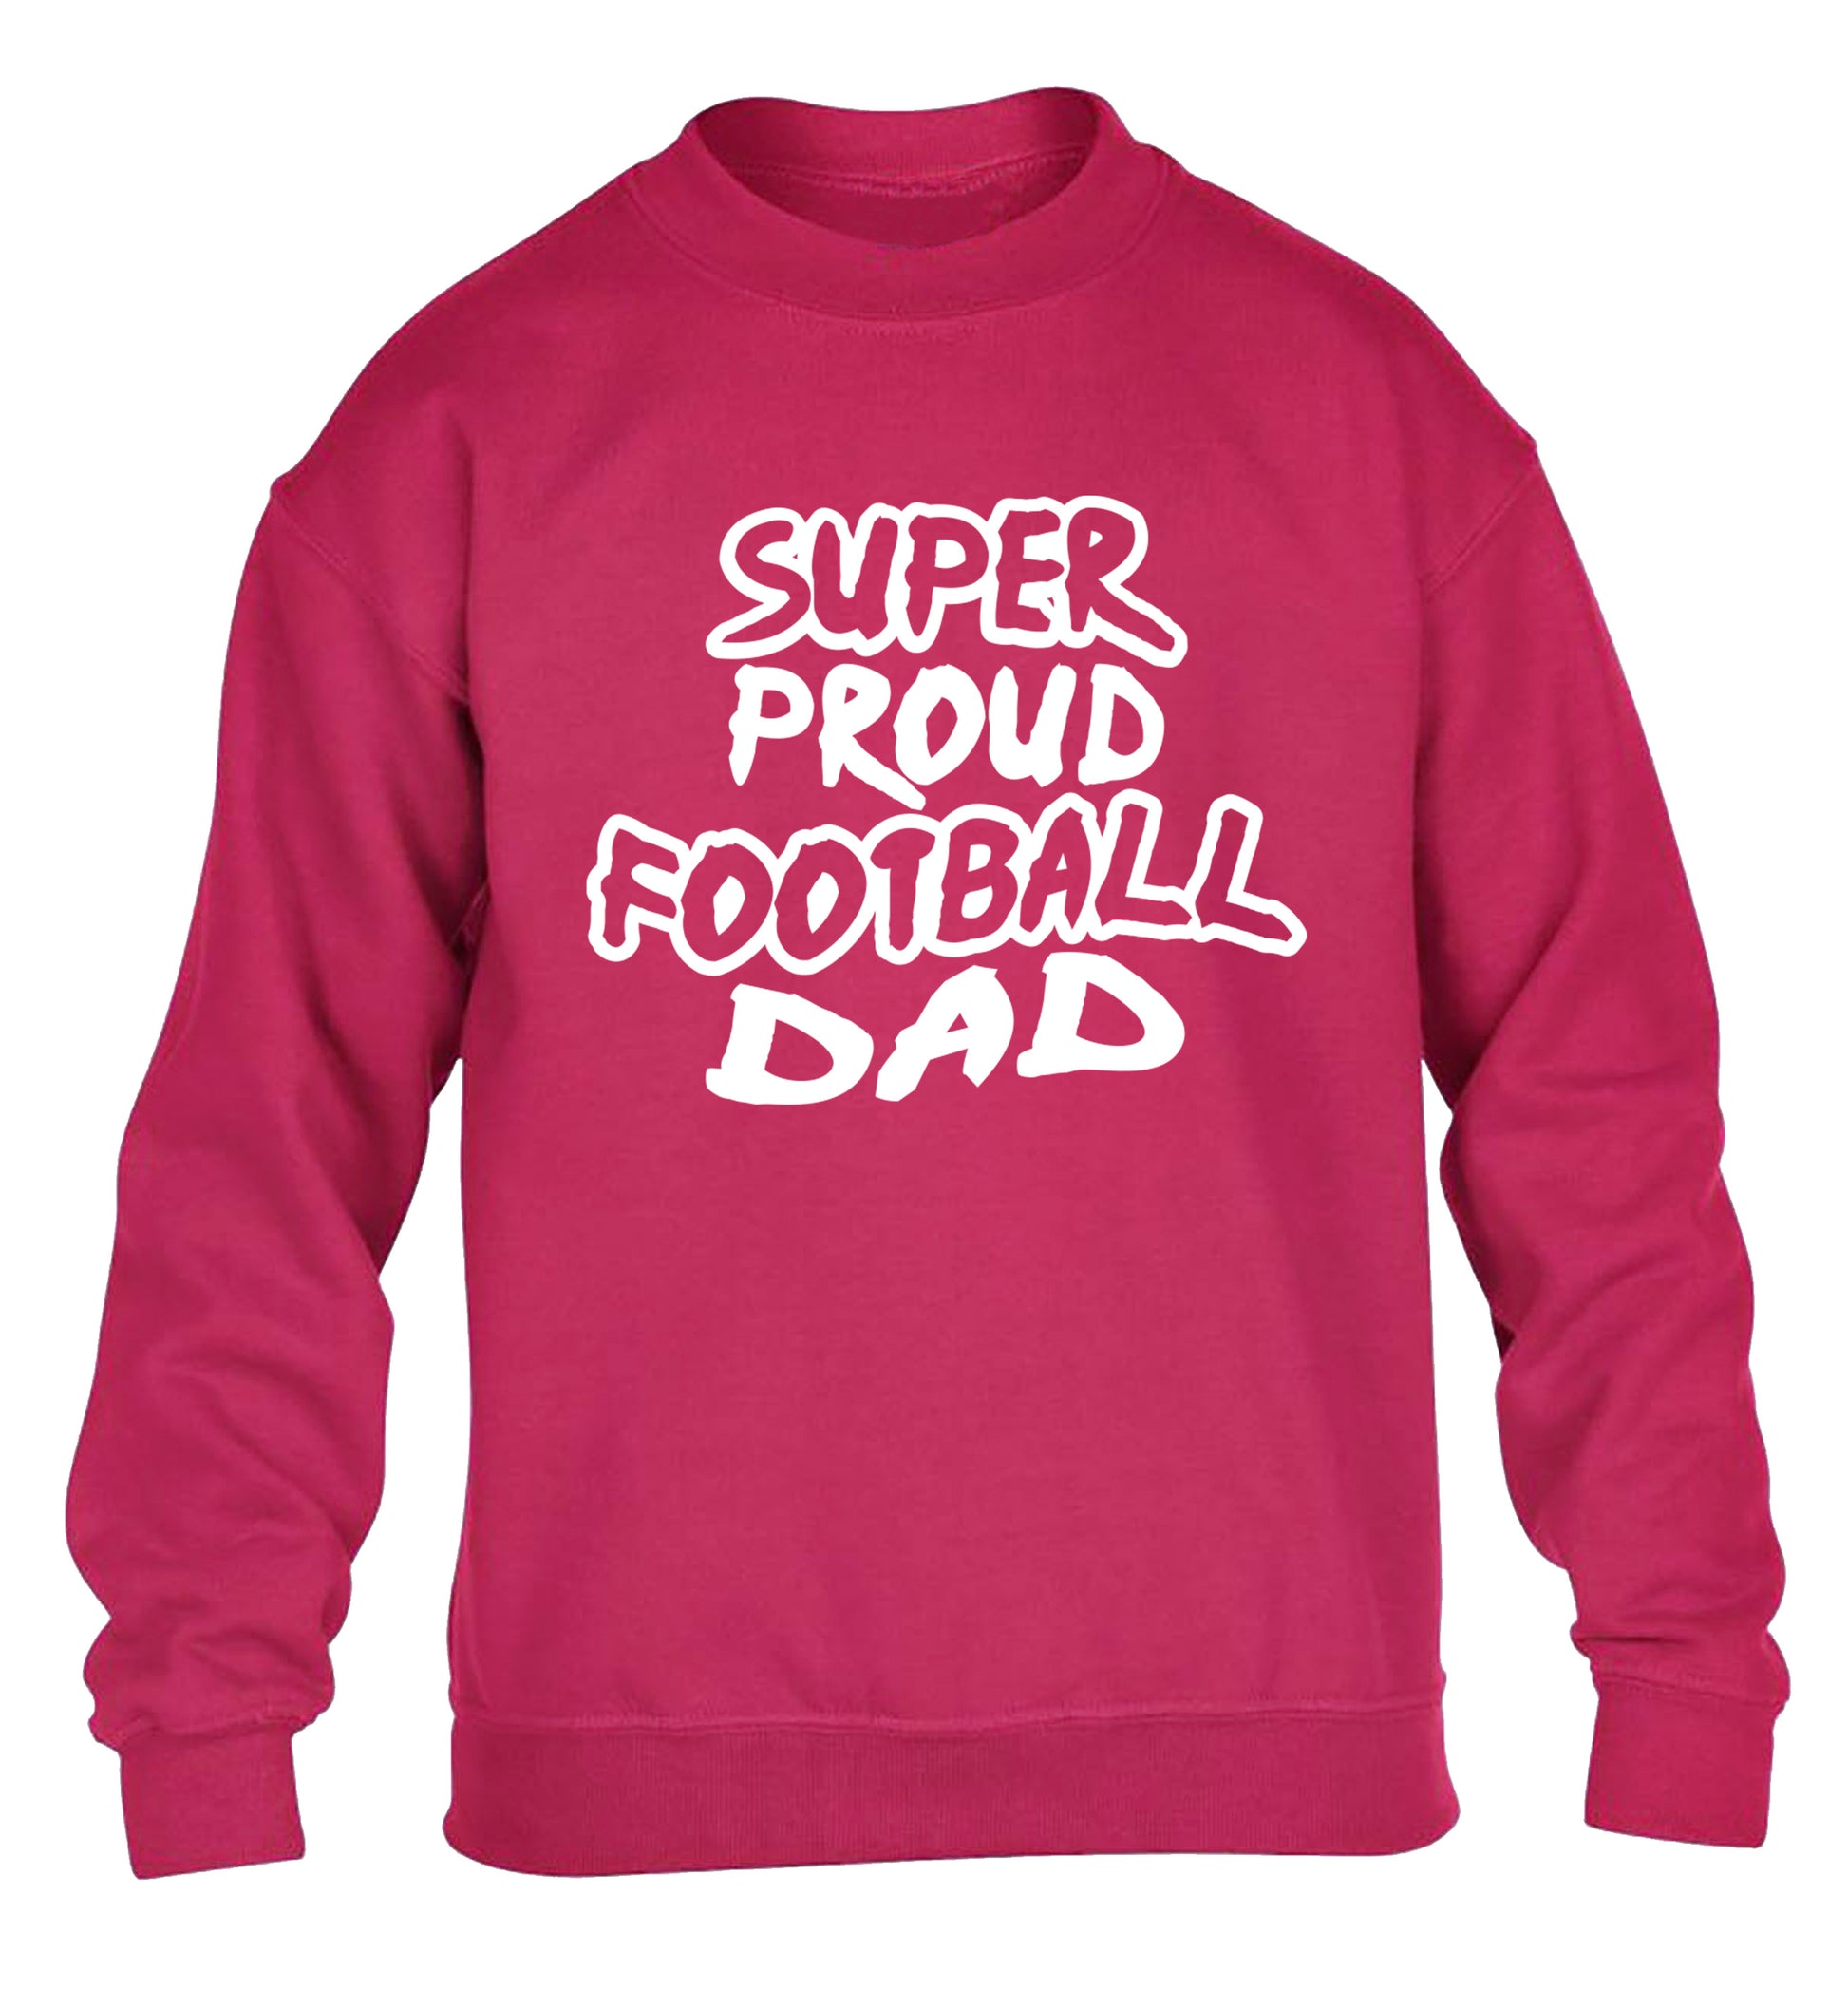 Super proud football dad children's pink sweater 12-14 Years